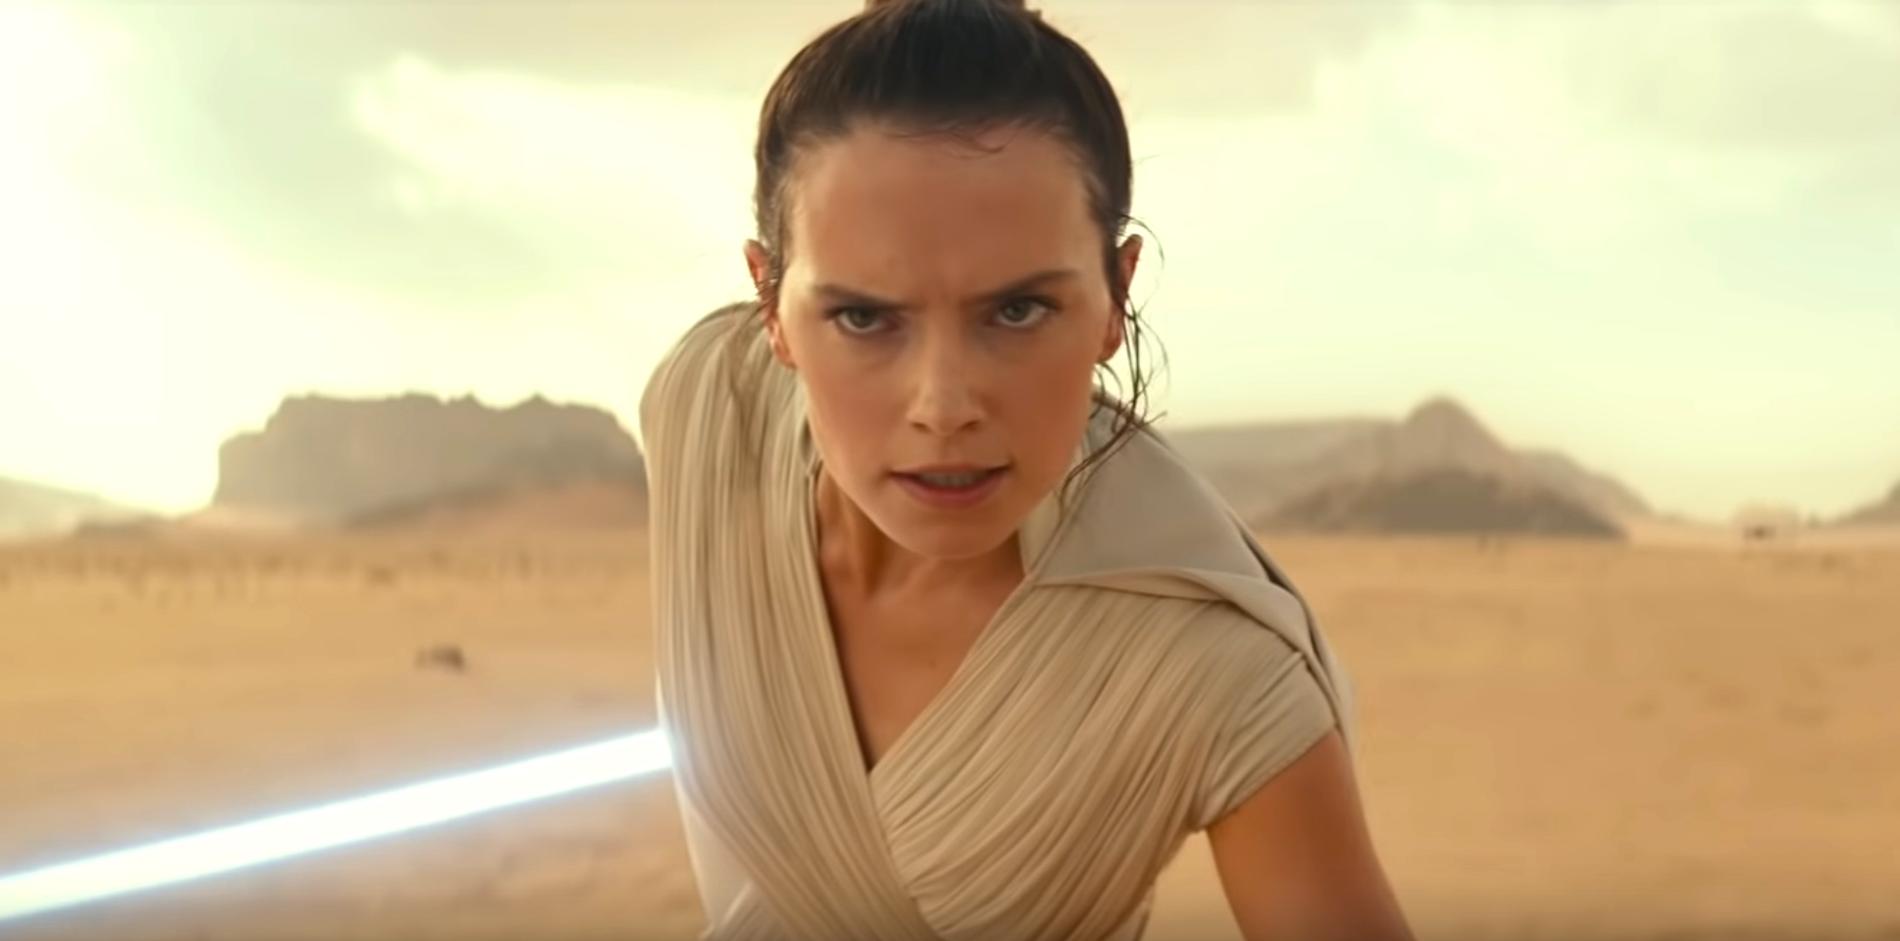 Daisy Ridley i ”Star wars: The rise of Skywalker”.